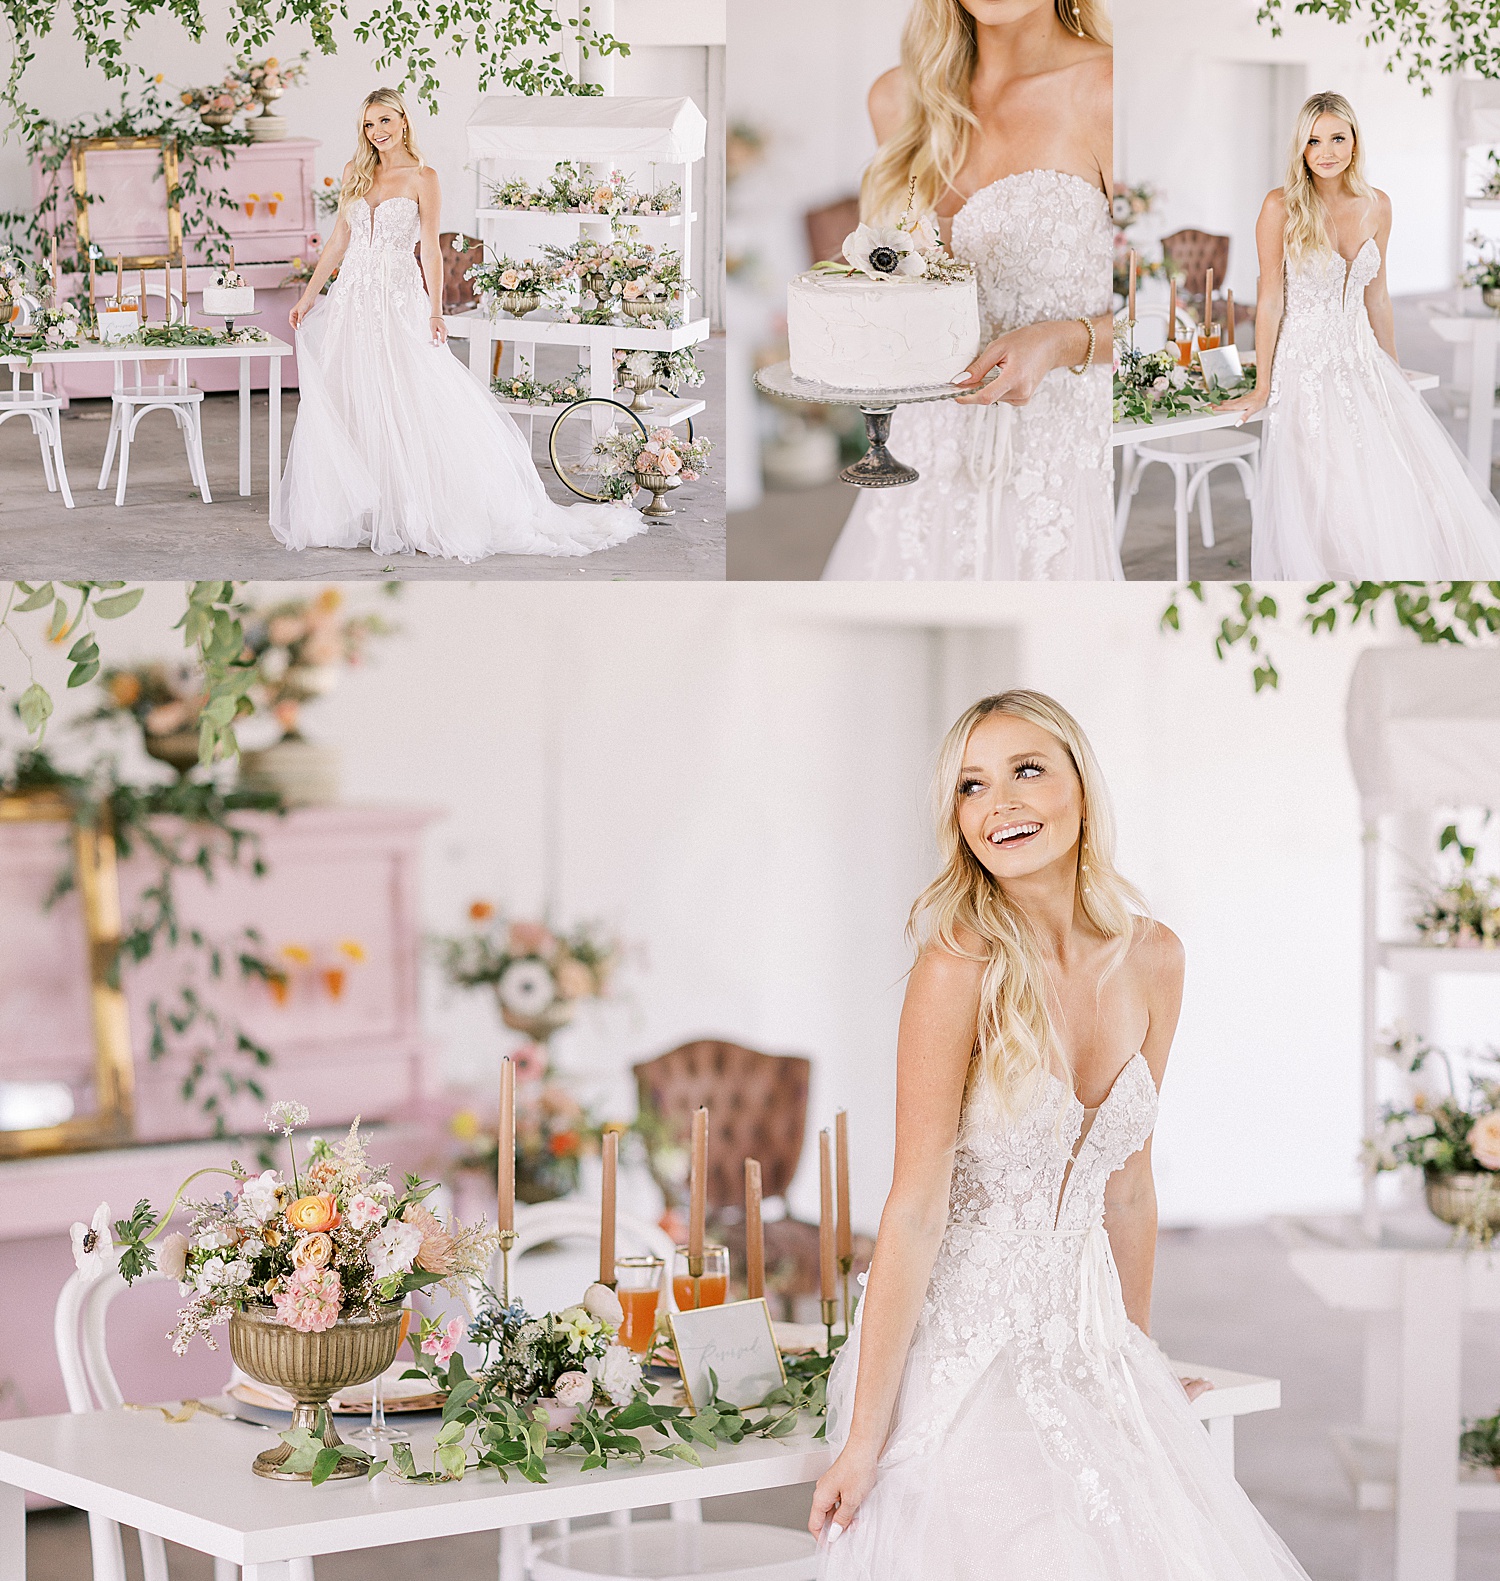 BRide in wedding gown holding cake with colorful florals and velvet rentable chairs for wedding days